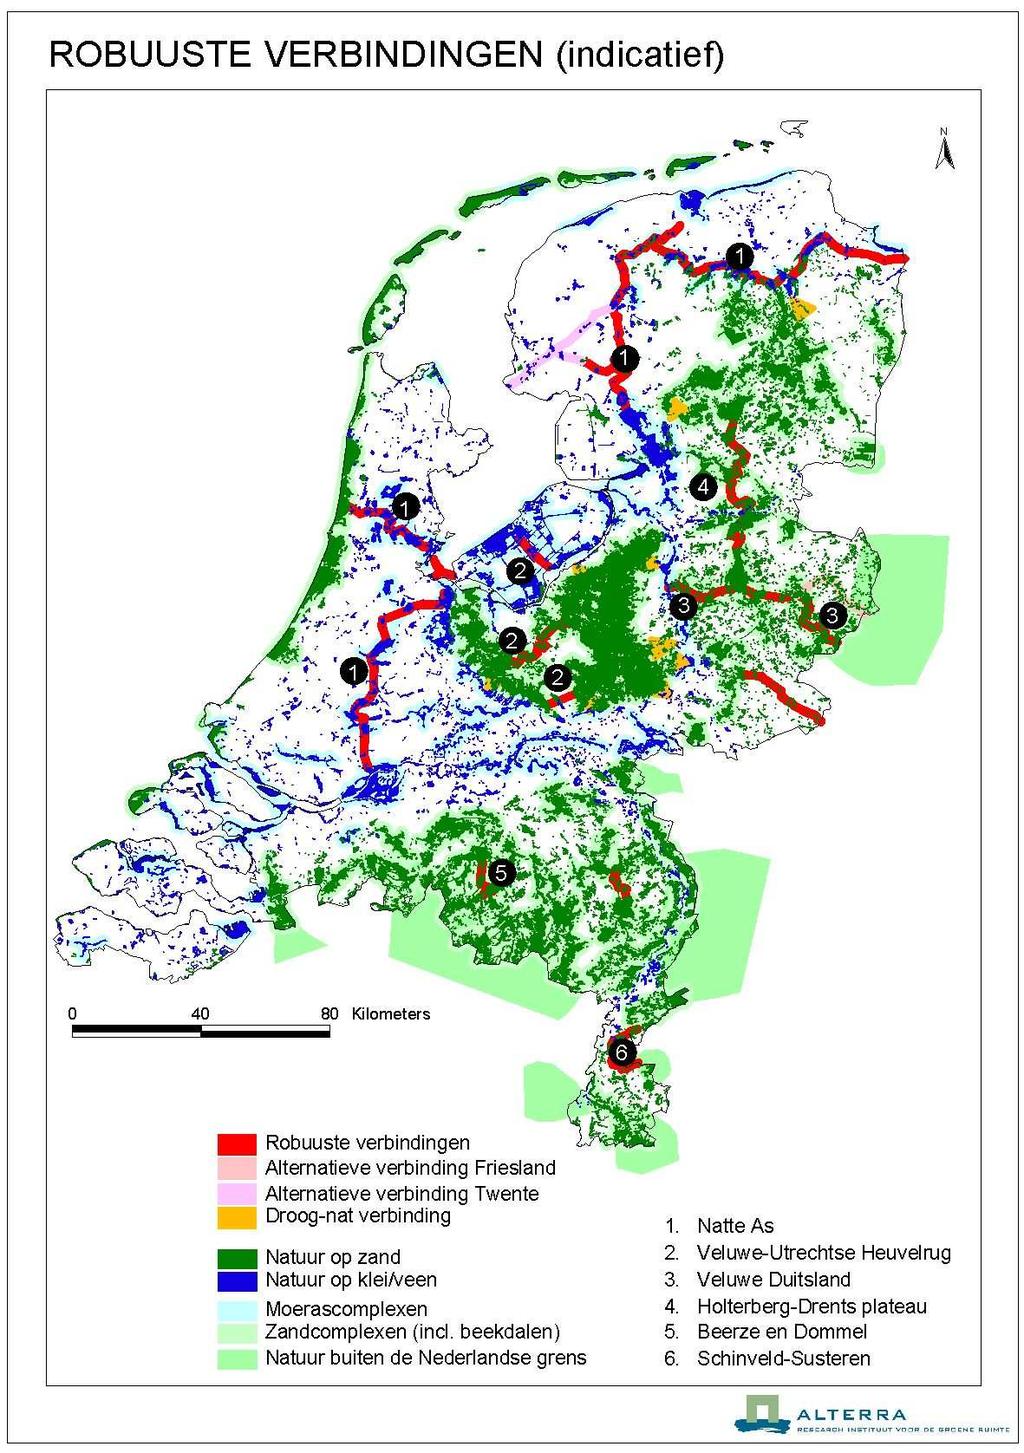 Dutch National Ecological Network: the only network in Europe in which article 10 of the Habitat